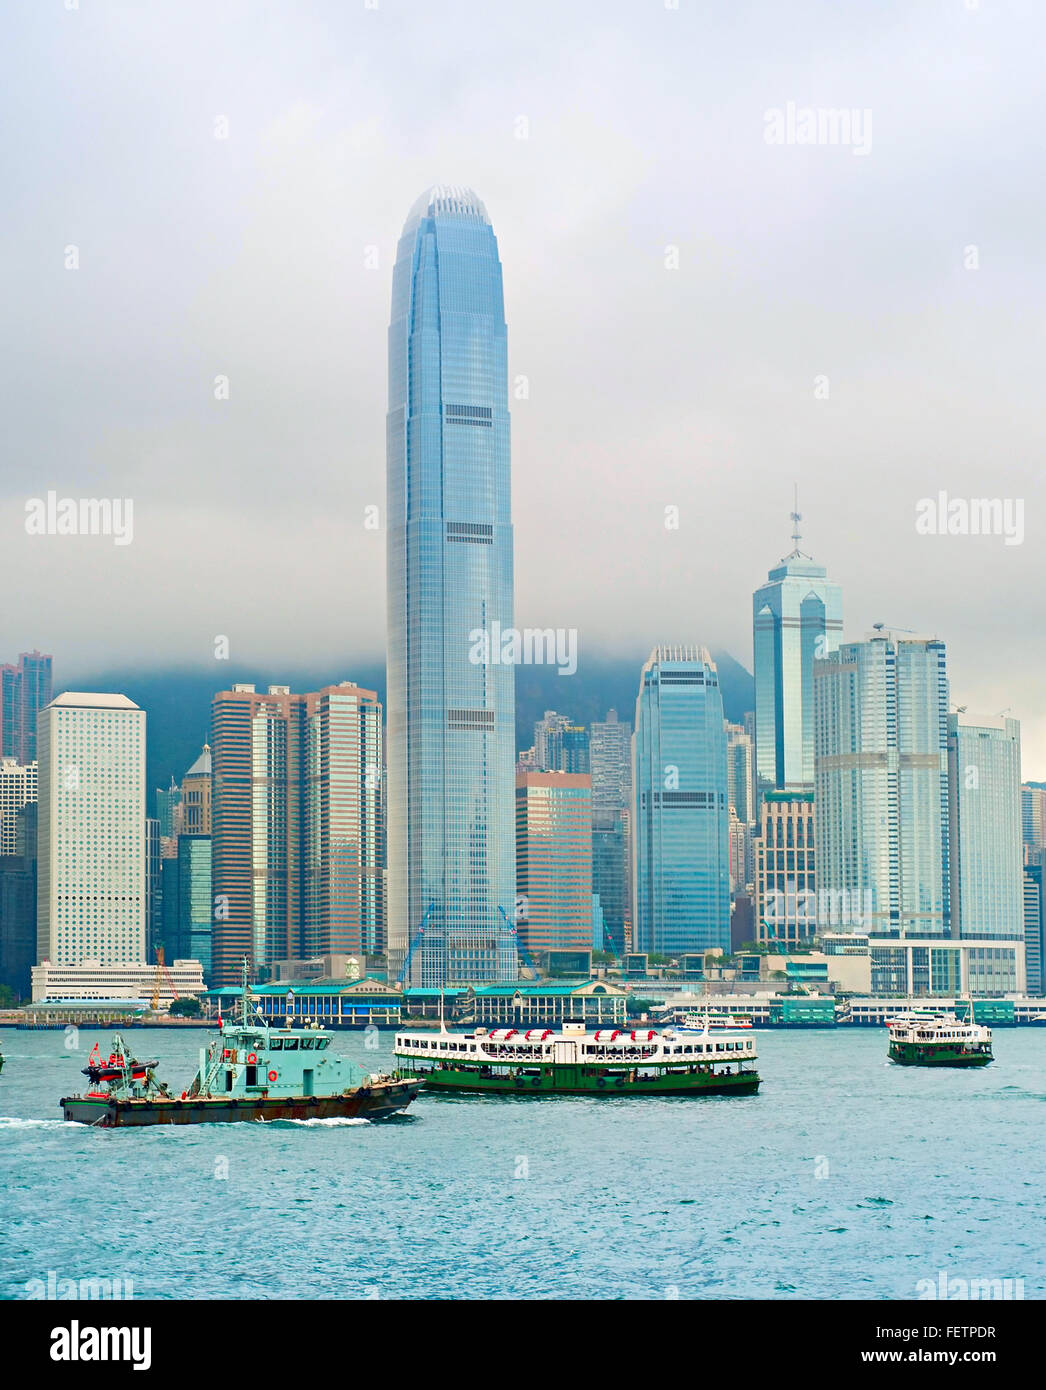 Hong Kong bay with many different ships and rainy clouds Stock Photo